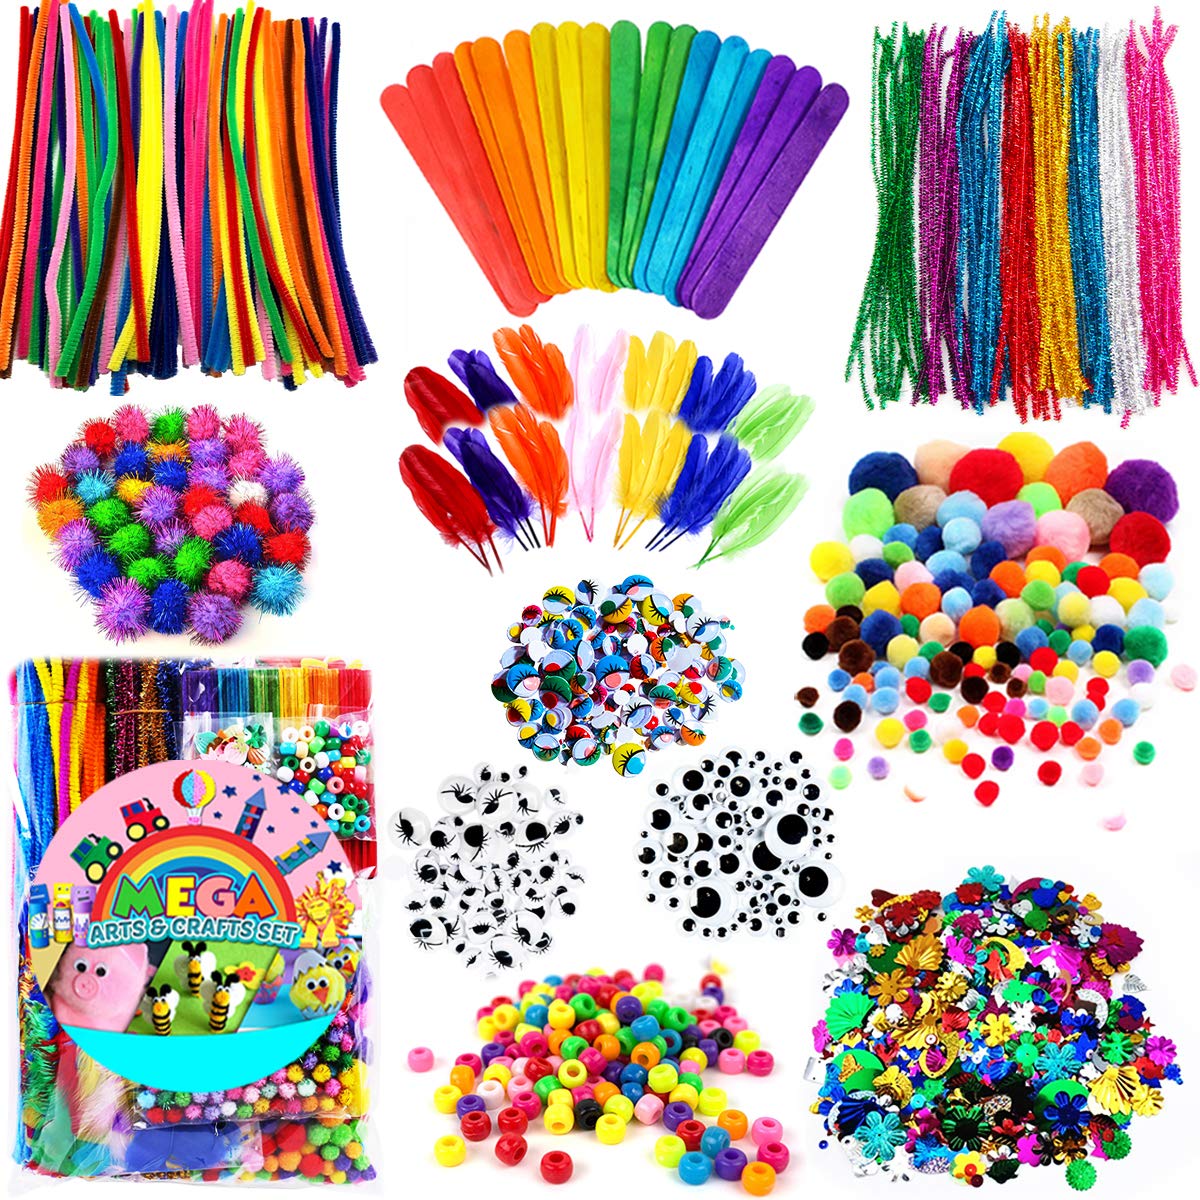 FUNZBO Arts and Crafts Supplies for Kids - Craft Supplies, Craft Kits with Pipe Cleaners, Pom Poms for Crafts & Gloogly Eyes, Crafts for Kids Ages 4-8, 4-6, 8-12, Preschool Supplies